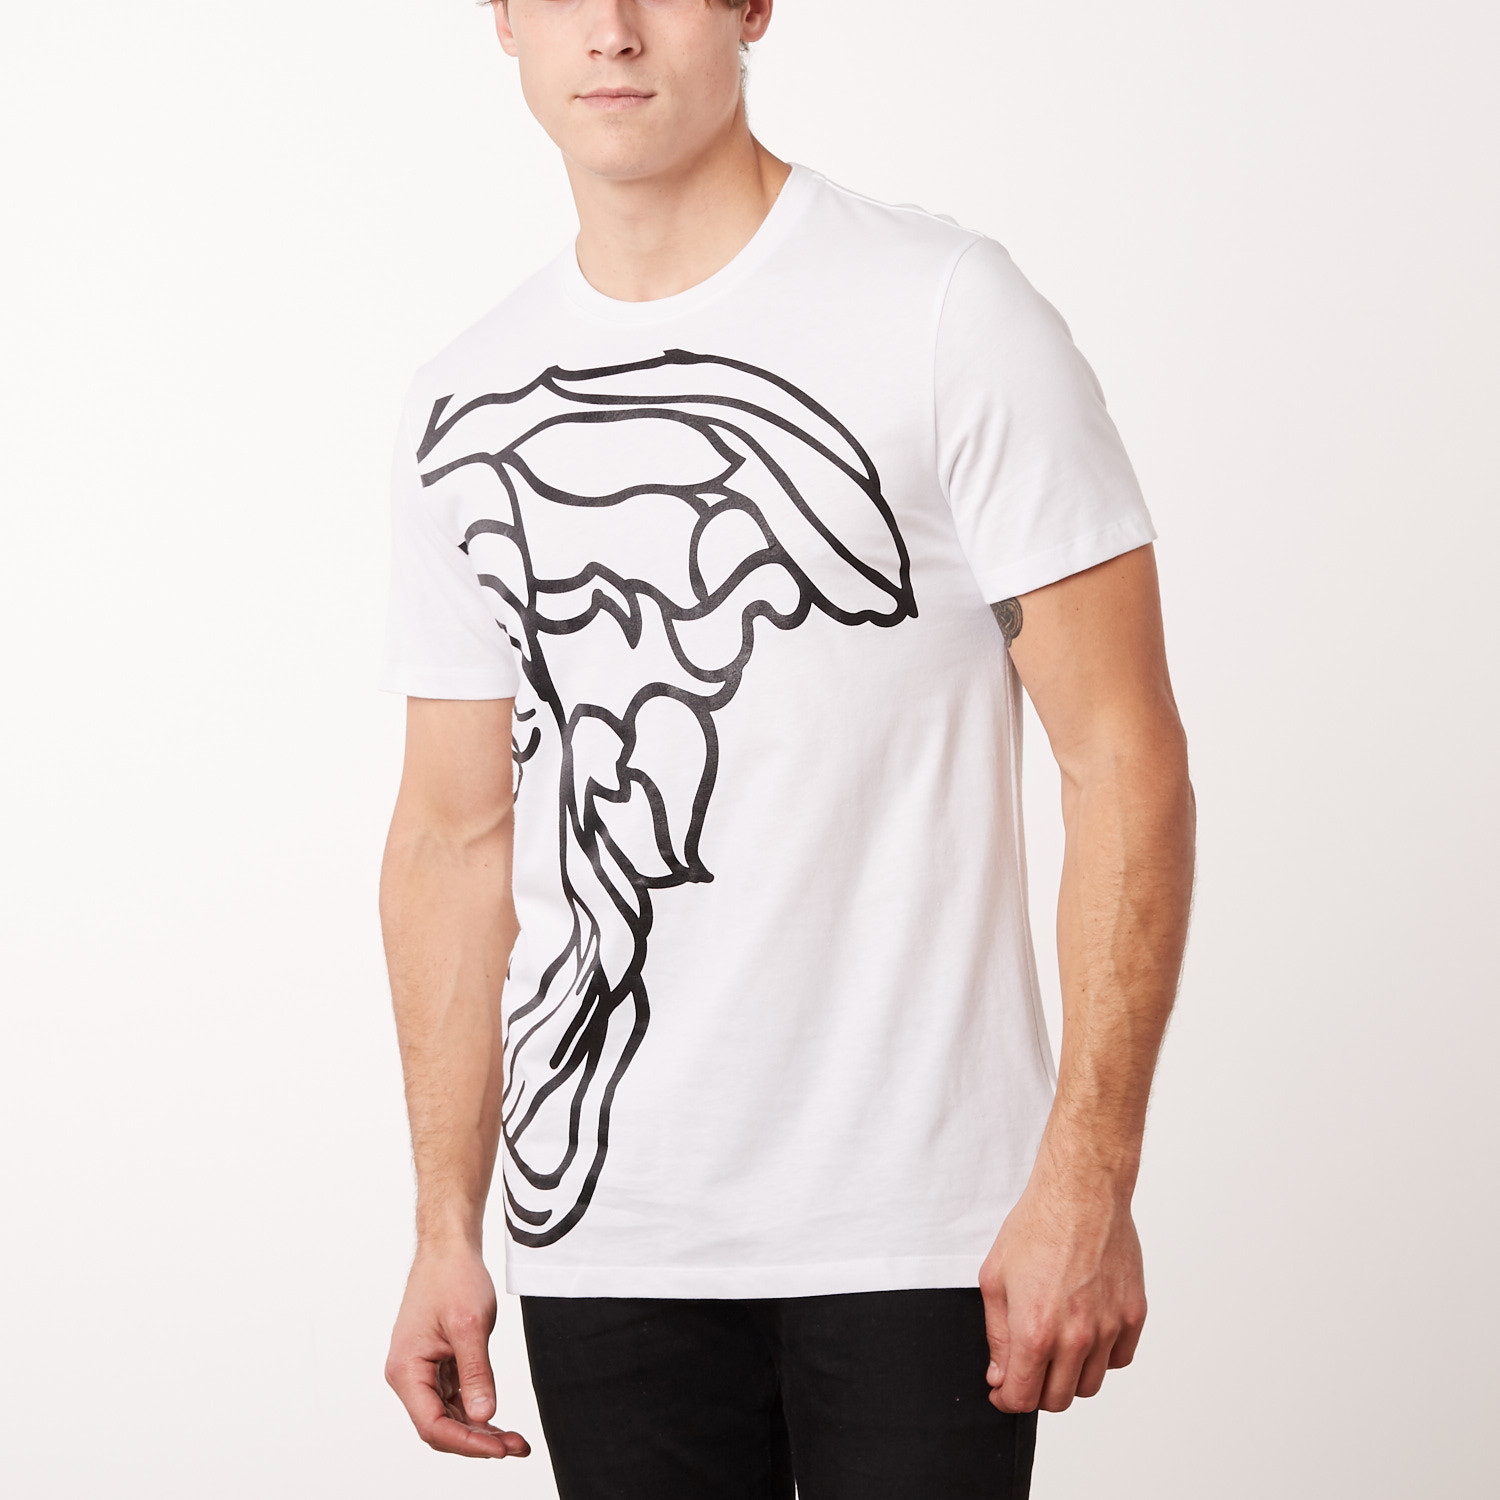 Collection t me. Versace t Shirt White. Футболка Дикейс. Versace collection. HEG collection футболки.